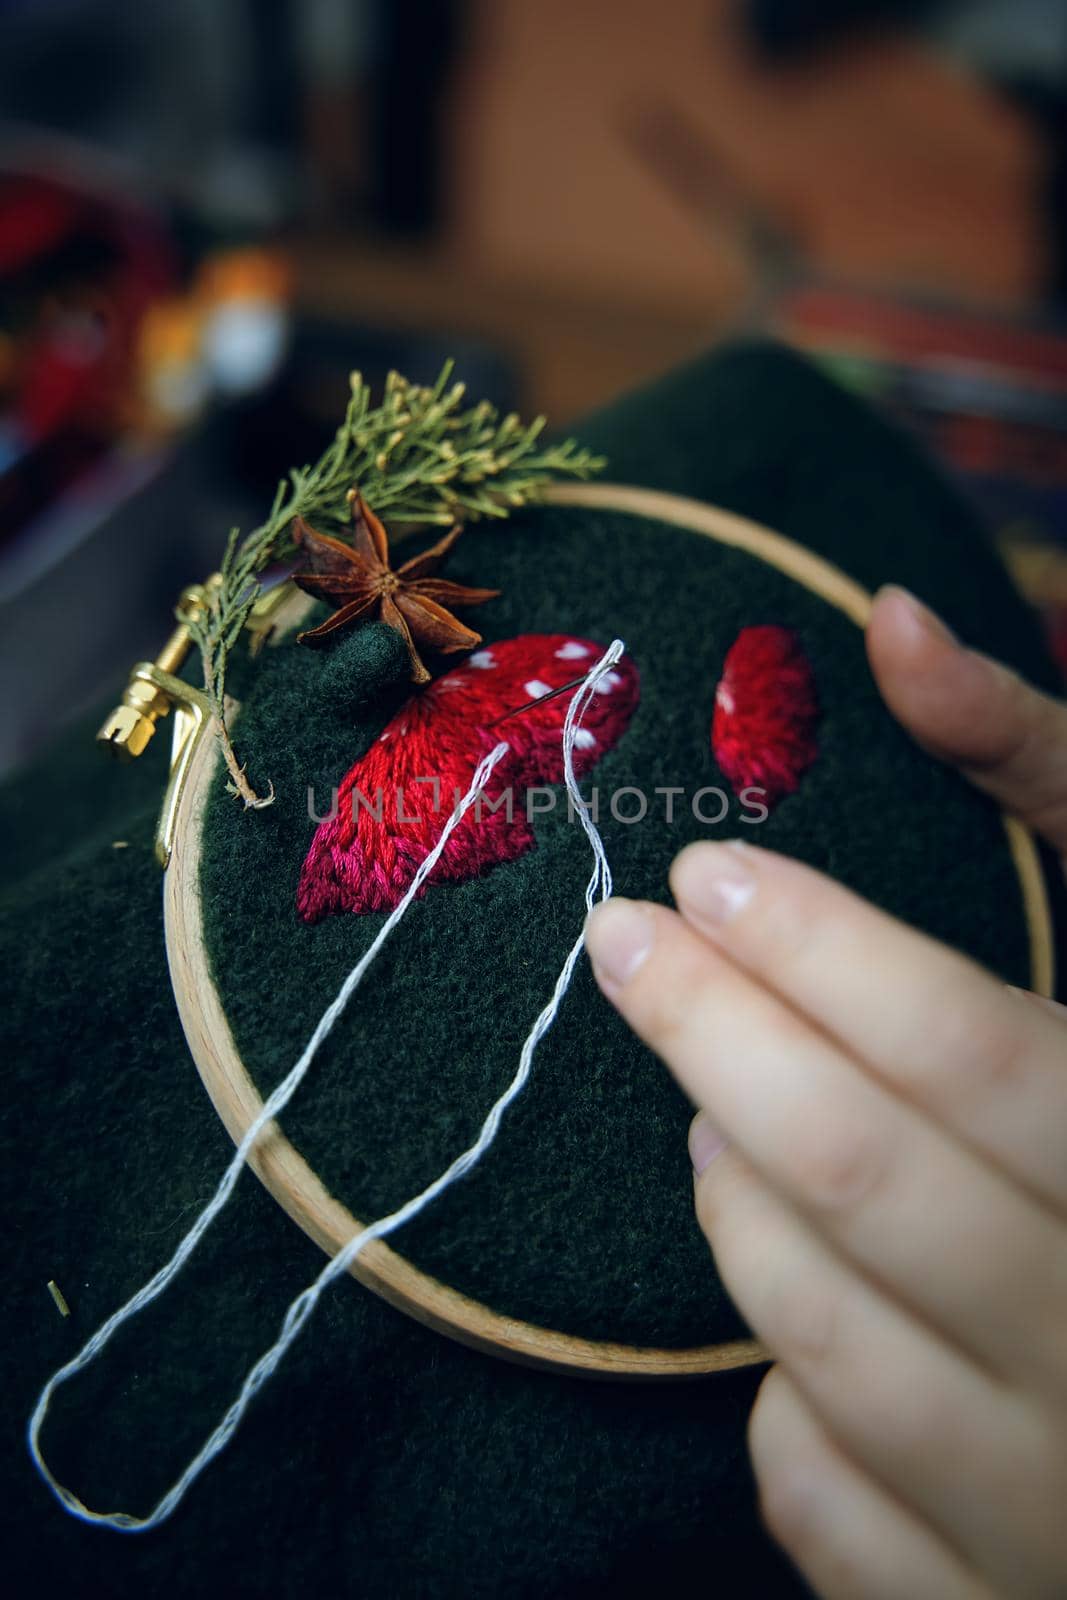 Close up of woman hands doing stitch. Process of embroidery of mushroom hat in wooden hoop on green material. Concept of needlework diy, hobby, leisure.